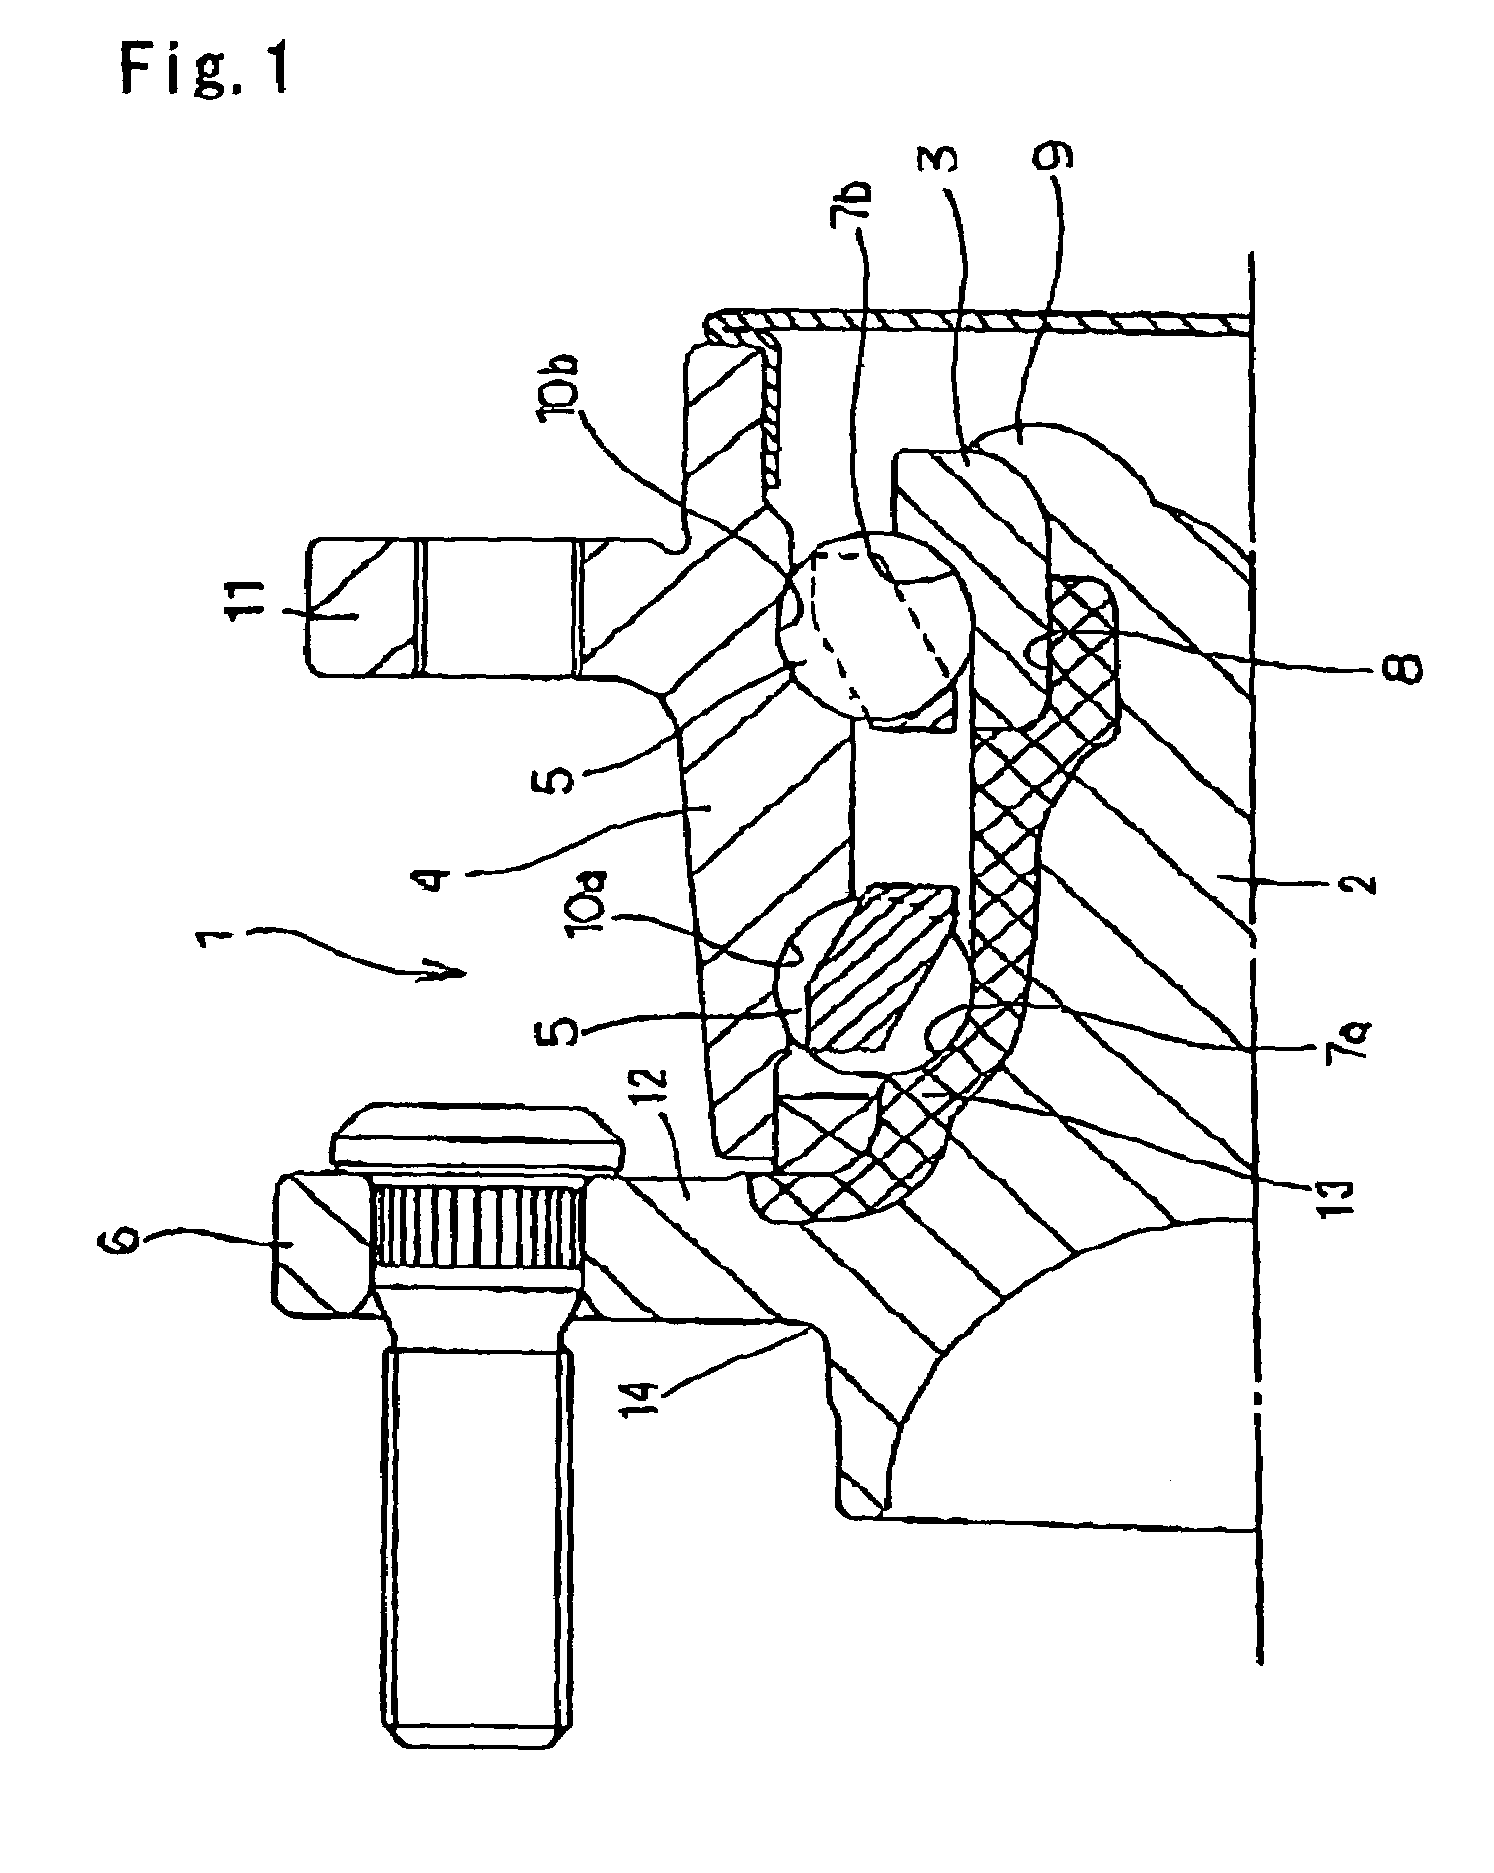 Wheel-support rolling bearing unit